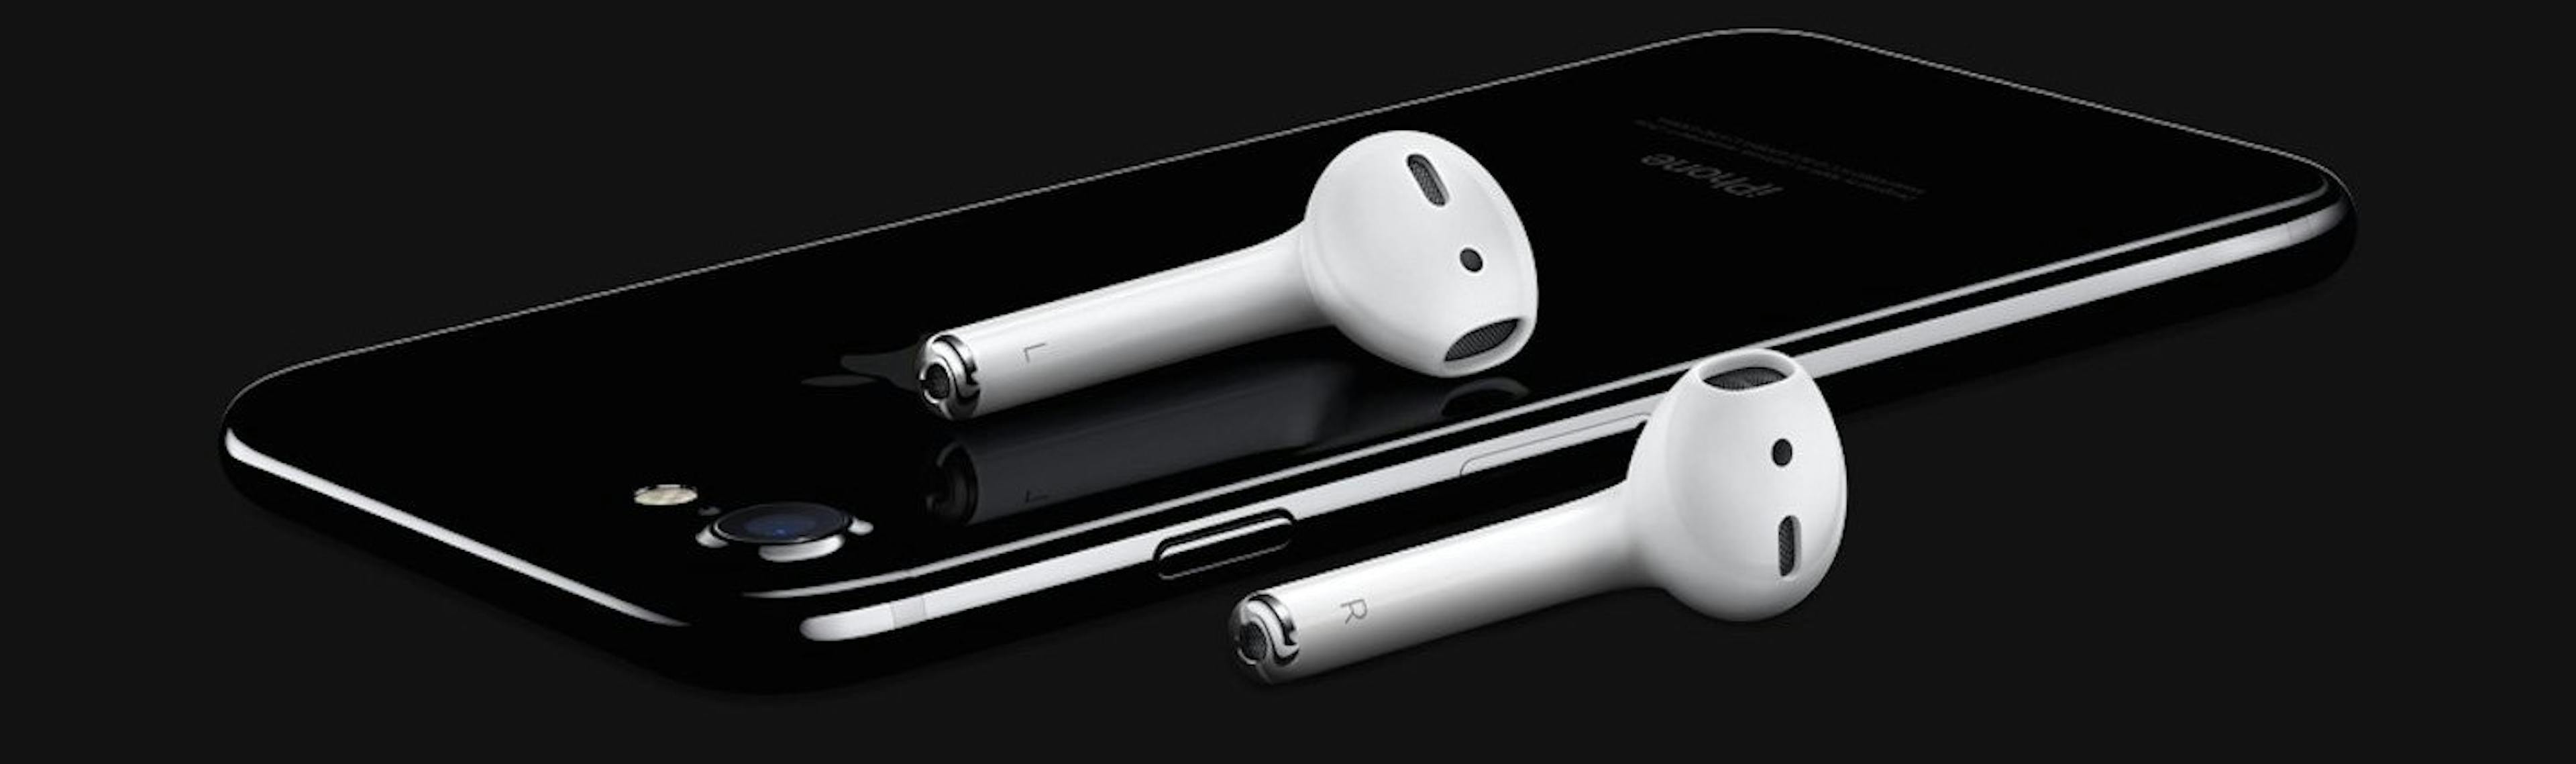 featured image - “Review”: AirPods